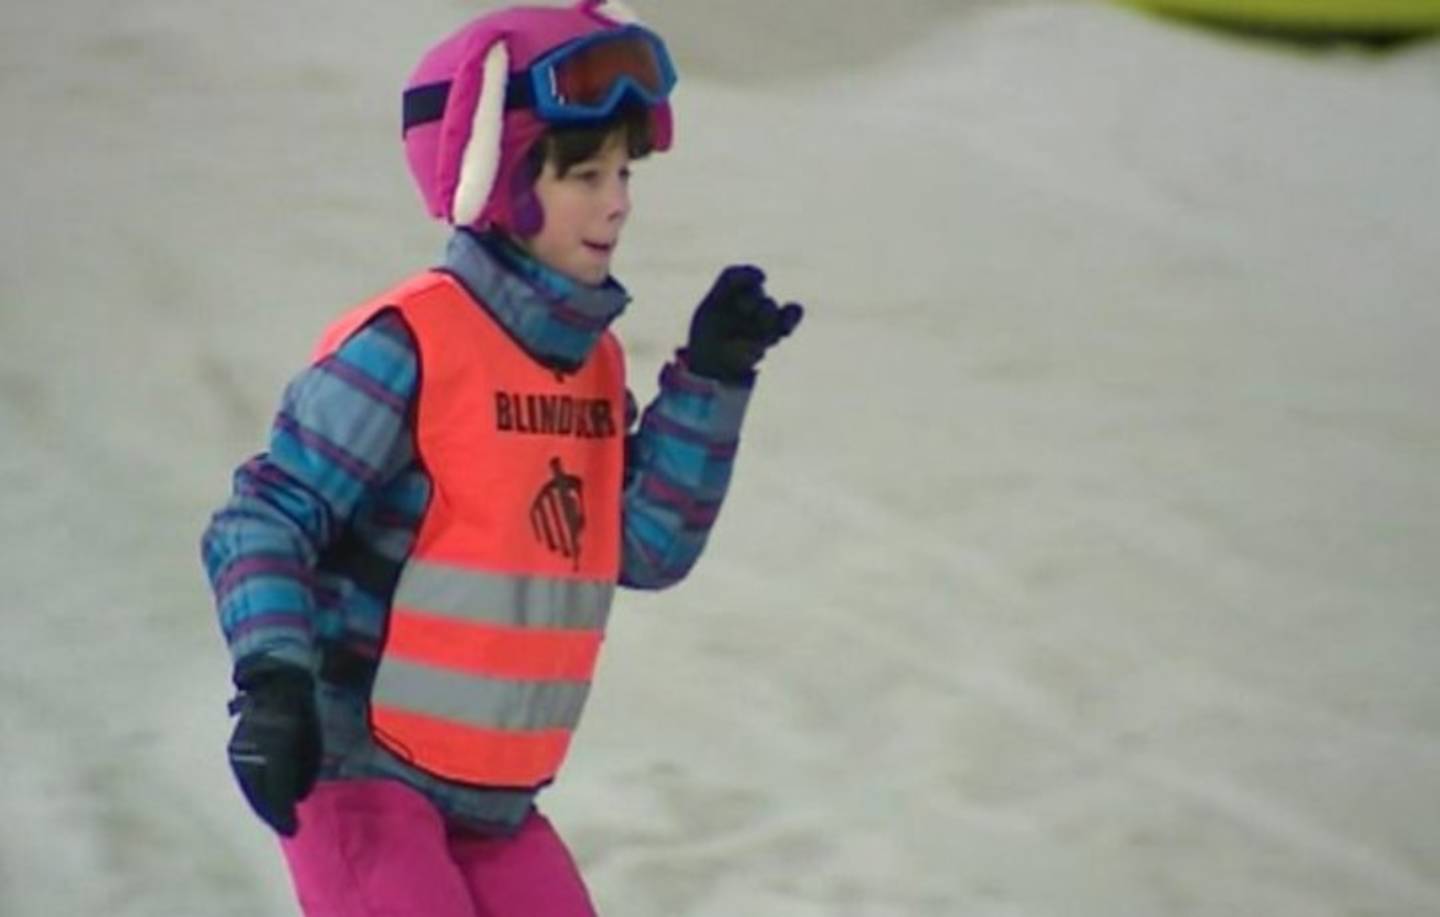 Eilidh skiing down the slopes. 